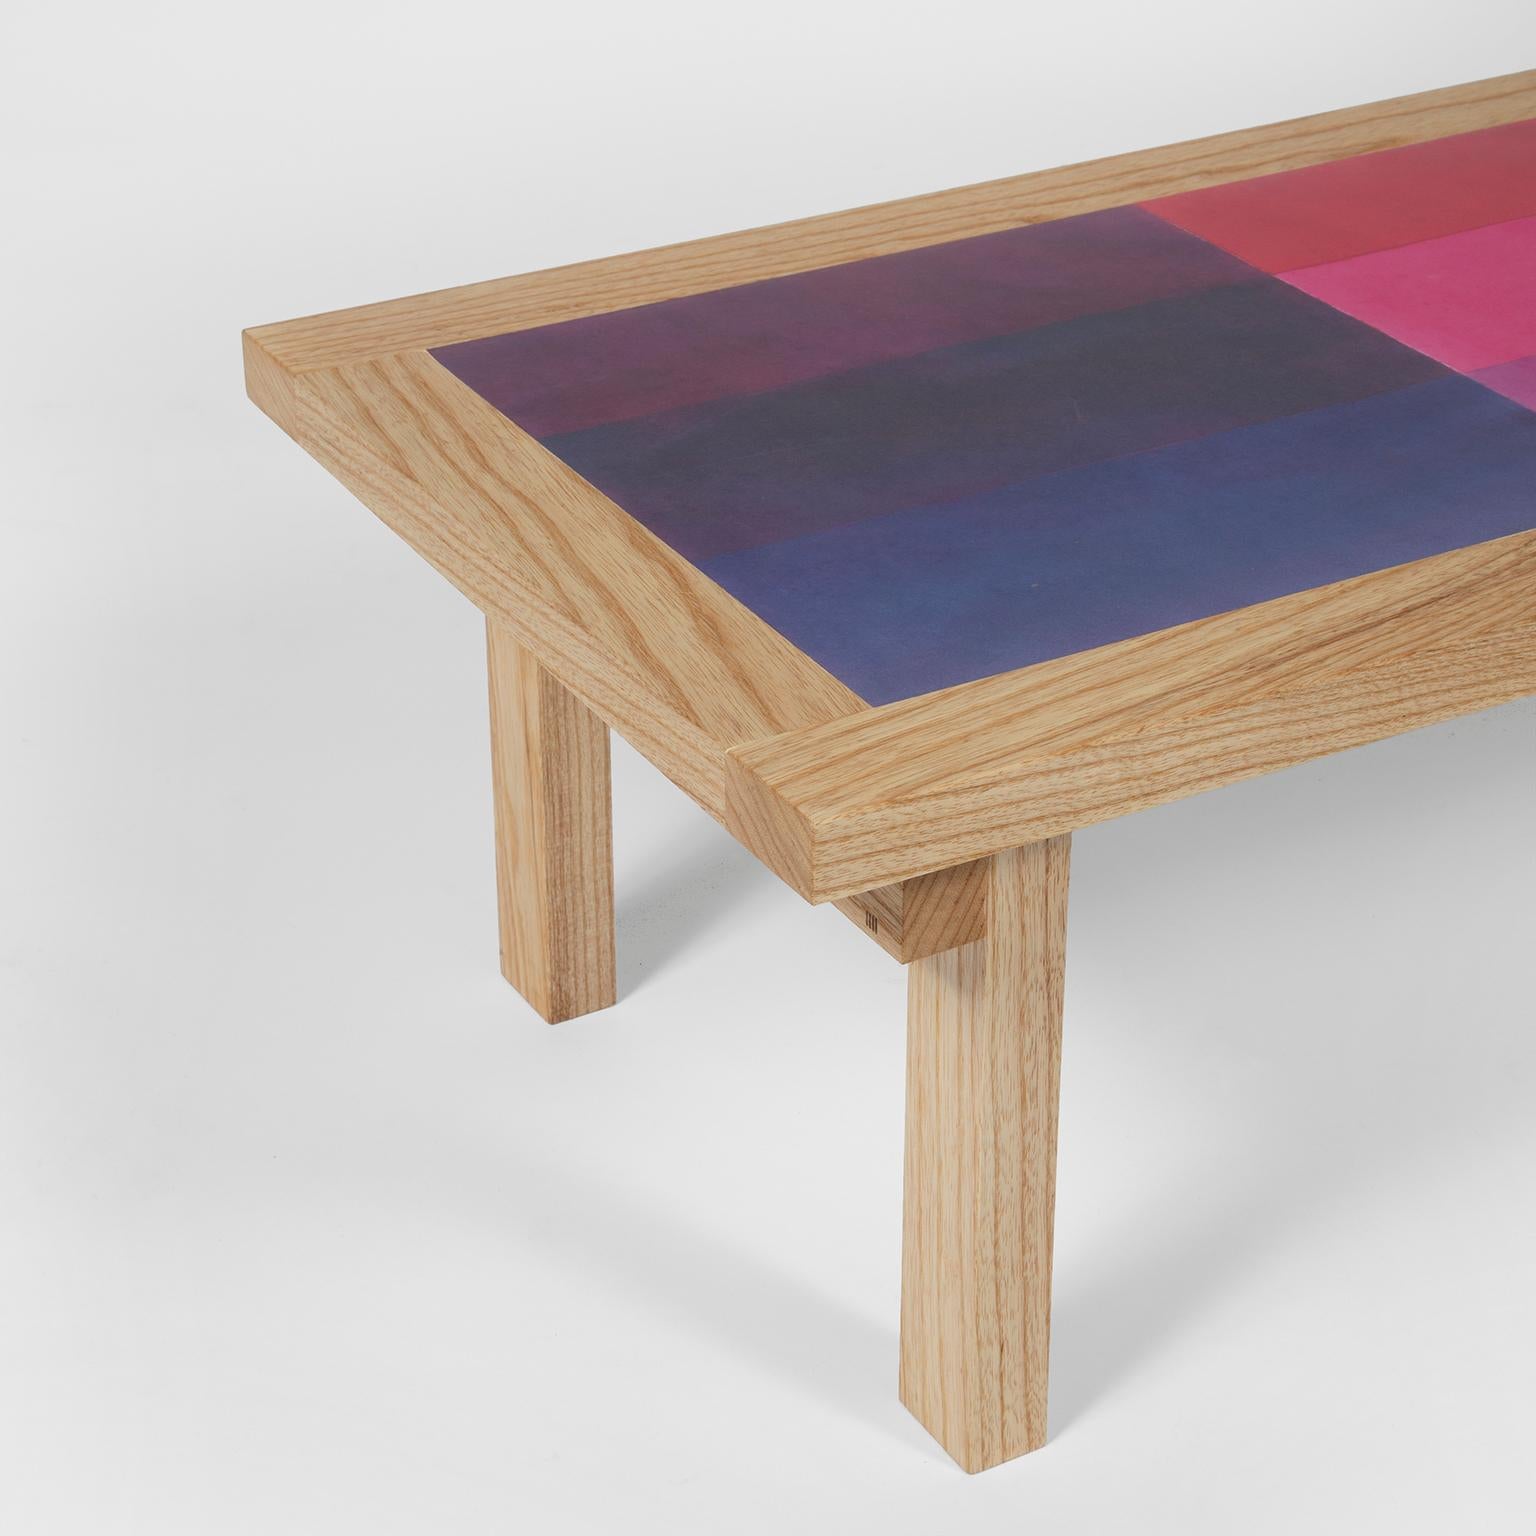 English Nine Colored Blocks Table by DANAD Design 'Robyn Denny' For Sale